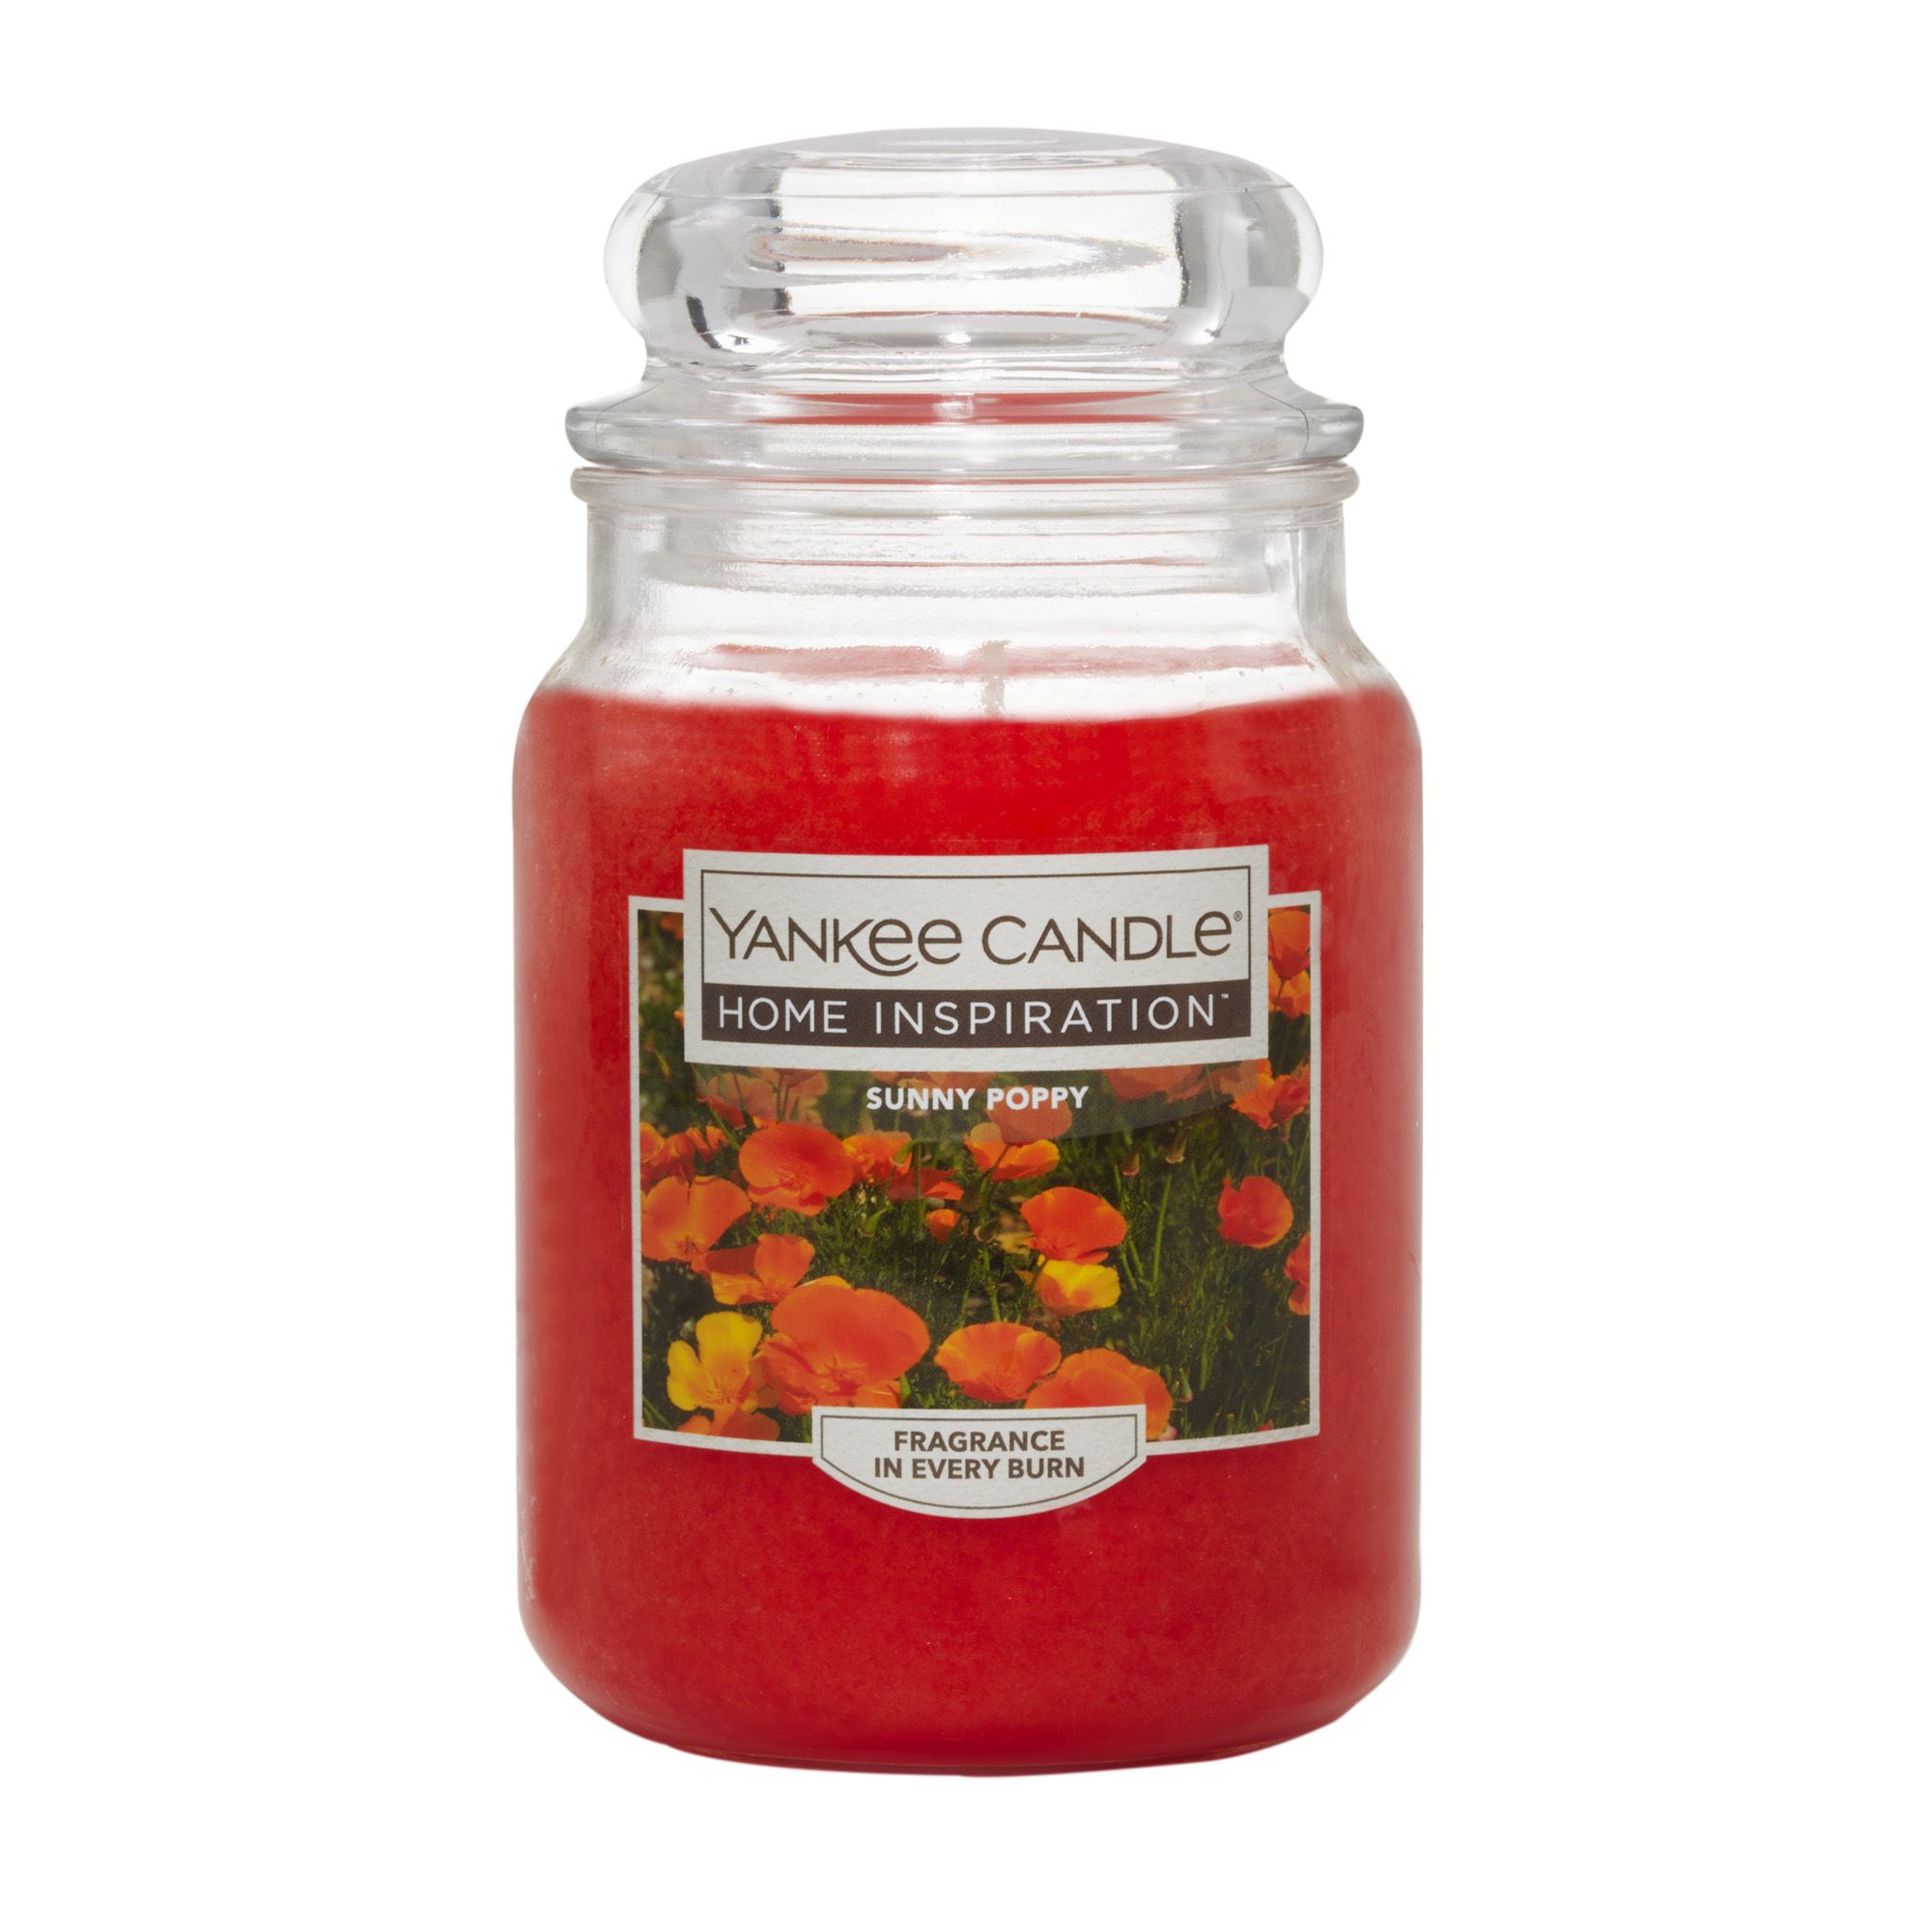 Yankee Candle Home Inspiration Sunny Poppy Candle, 19 oz.